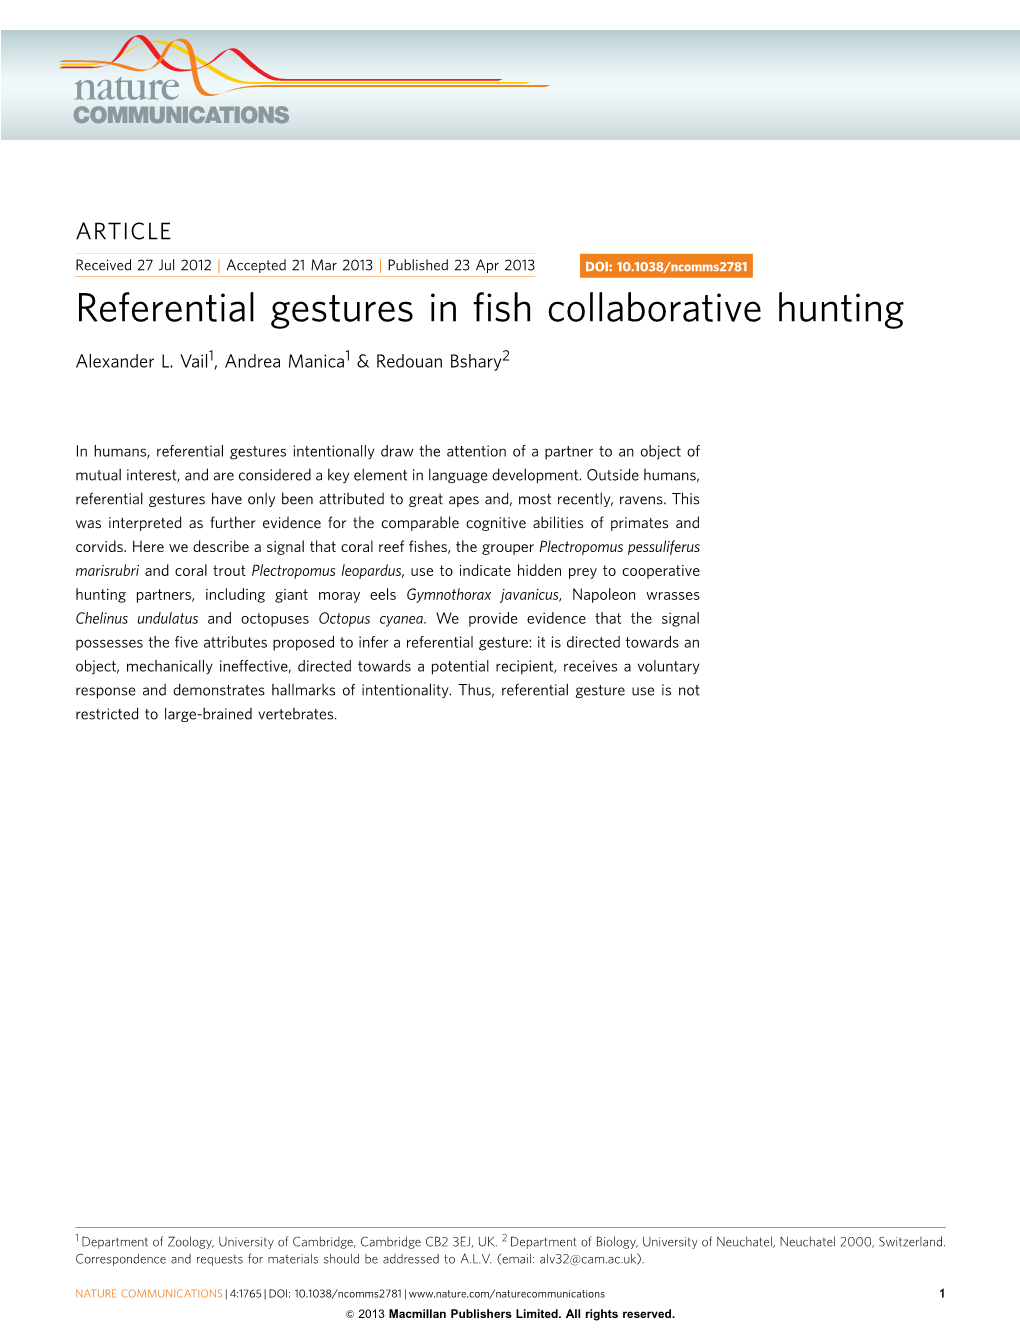 Referential Gestures in Fish Collaborative Hunting